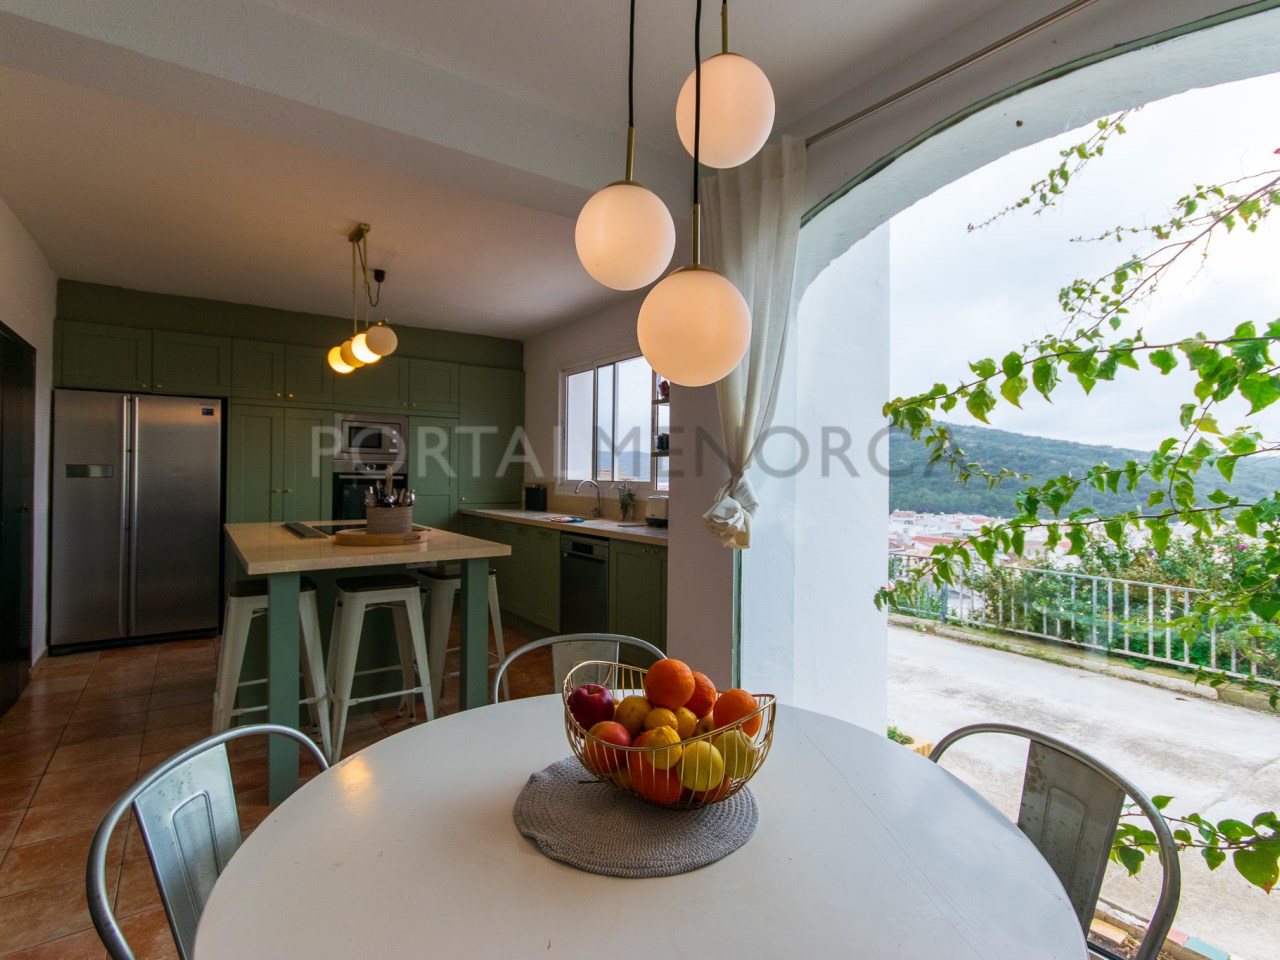 Kitchen-dining room of charming house with grounds and views of the village of Ferreries